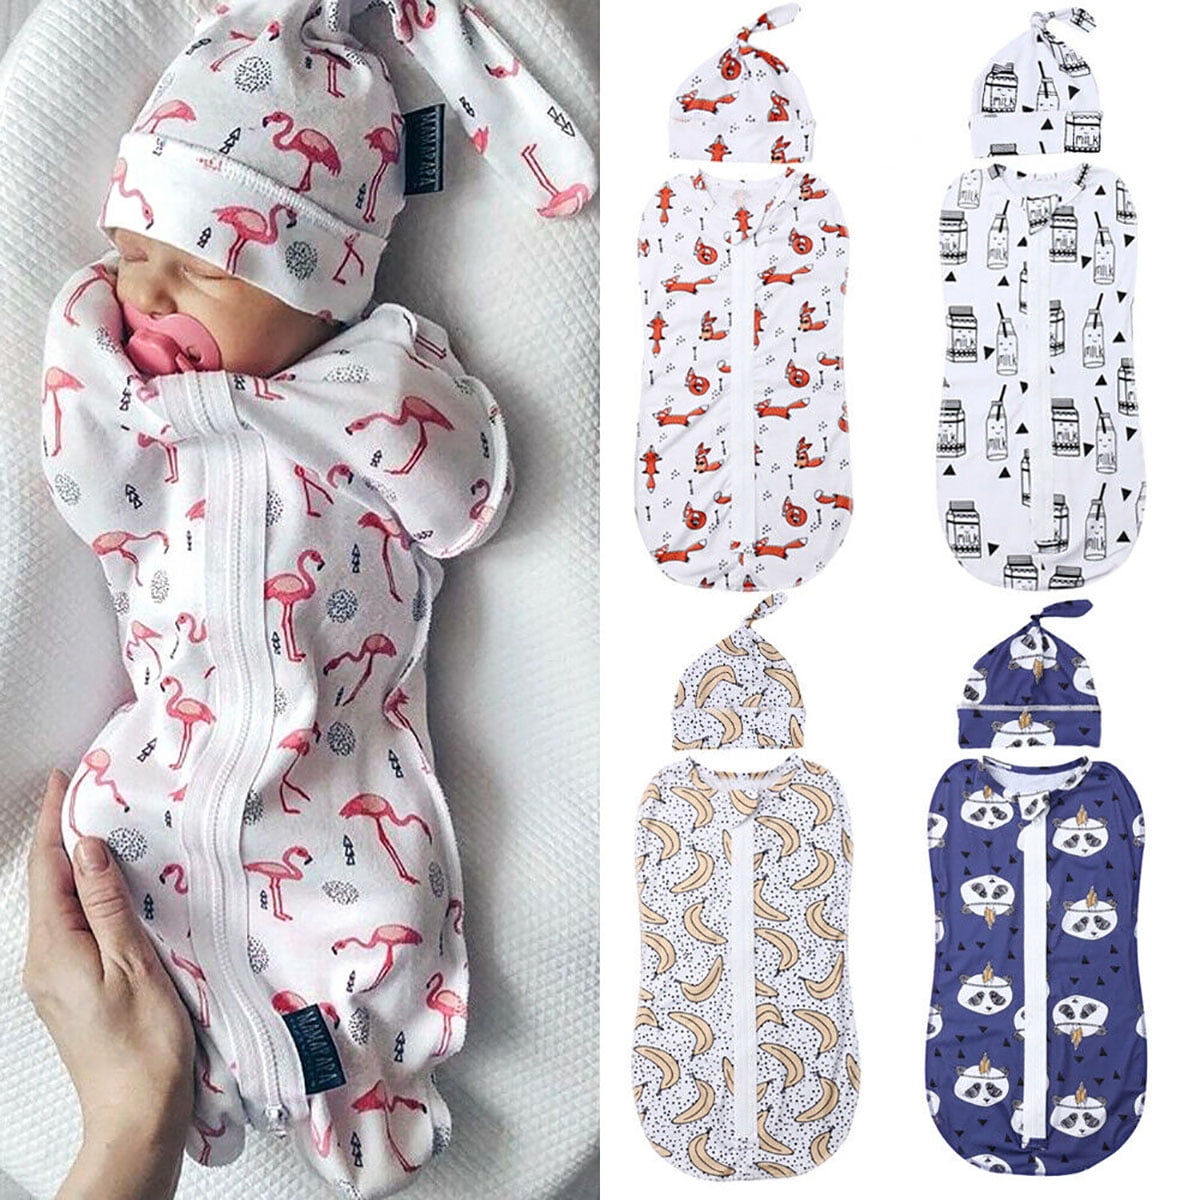 Baby Swaddle Blanket Cotton Baby Swaddle wrap Newborn Swaddle Blanket 6-9 Months